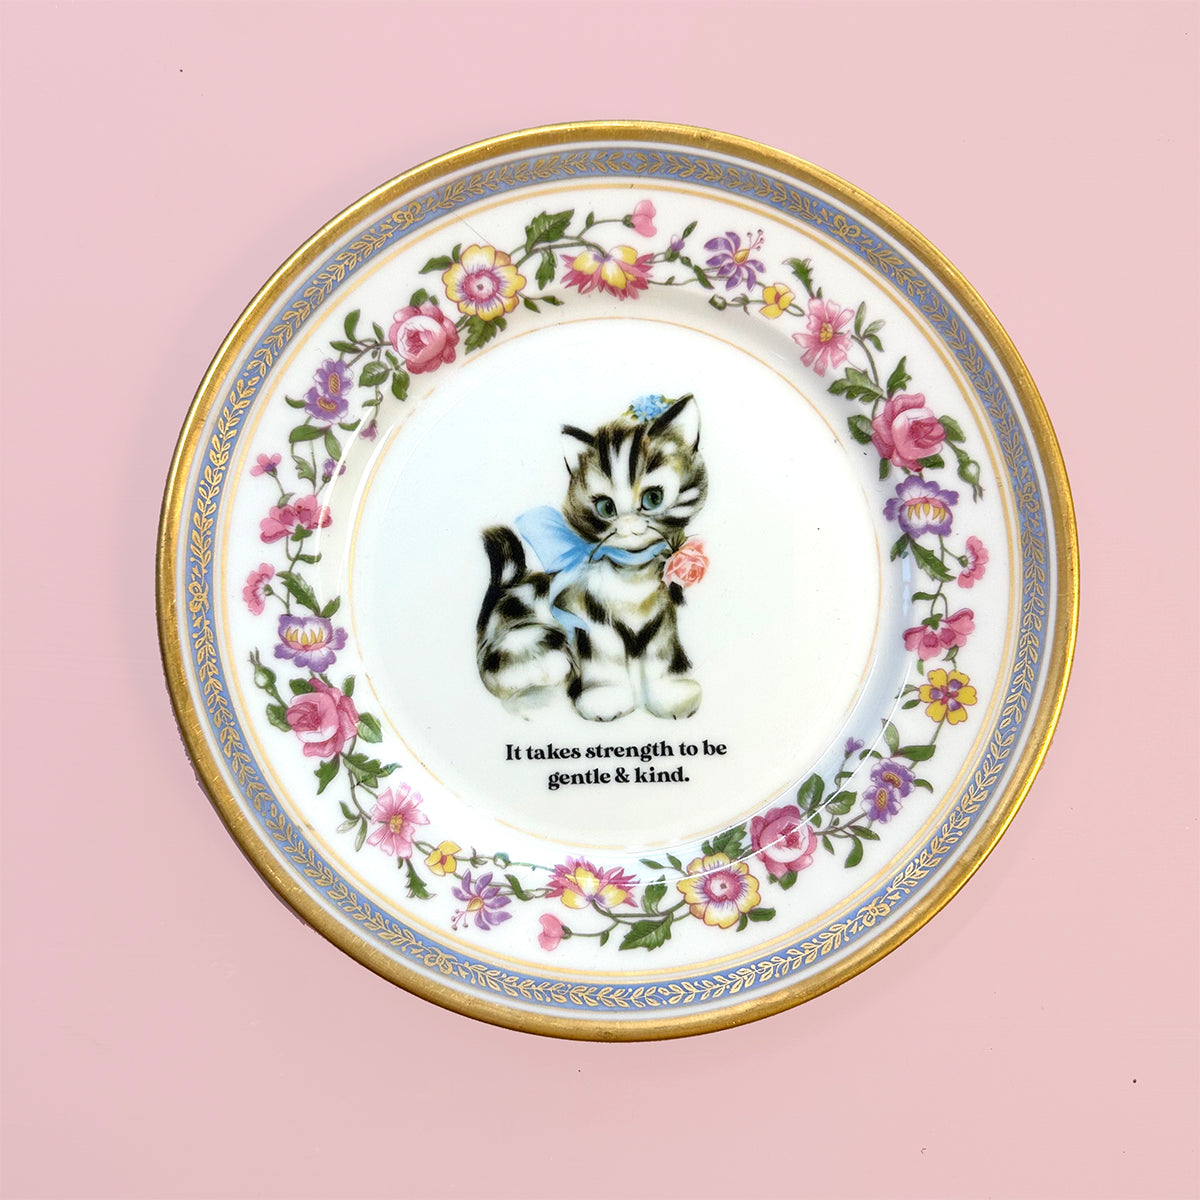 Vintage Art Plate - Cat plate - "It takes strength to be gentle & kind."